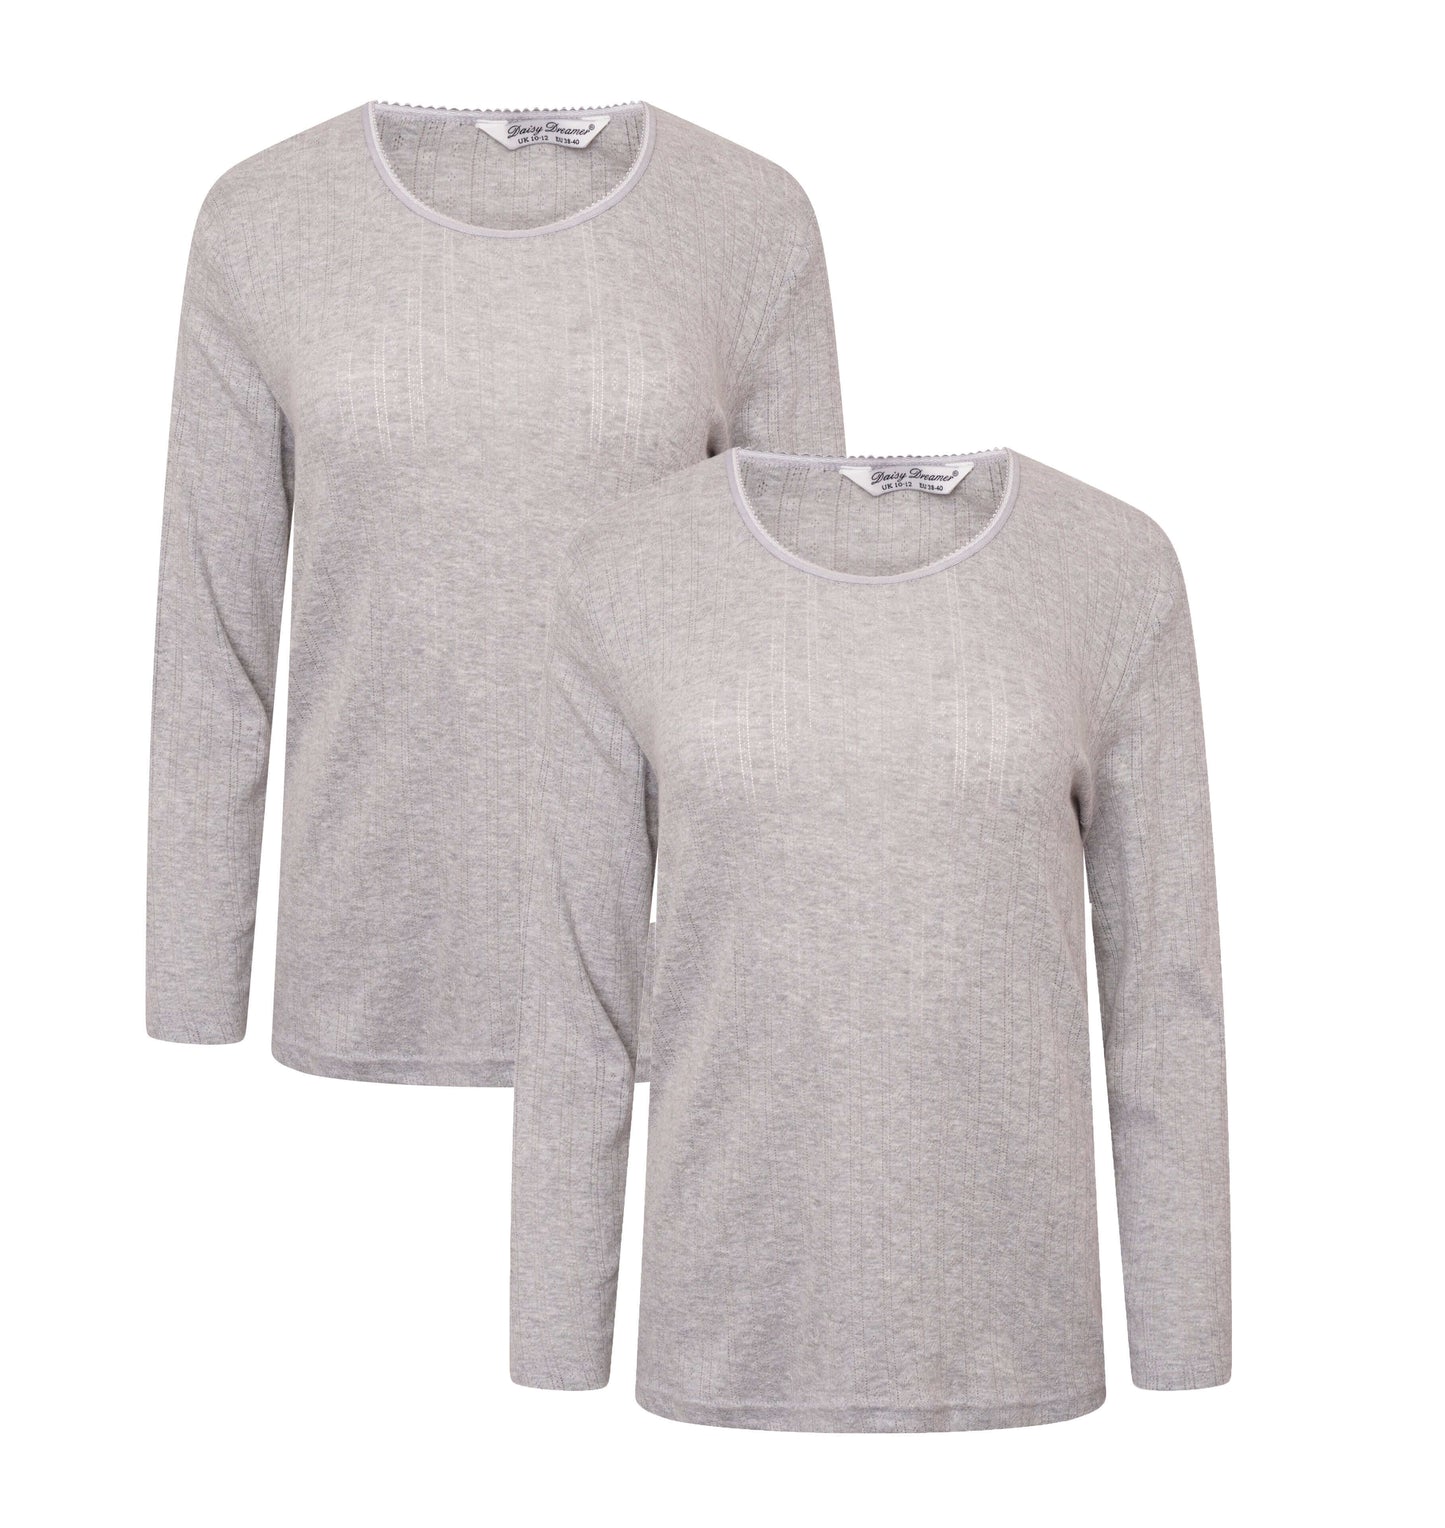 Heatwave® Pack Of 2 Women's Thermal Long Sleeve Top, Ladies Warm Winter Baselayer. Buy now for £10.00. A Thermal Underwear by Daisy Dreamer. baselayer, black, daisy dreamer, grey, heatwave, hiking, long sleeve, outdoor, pants, skiing, sports, thermal, the